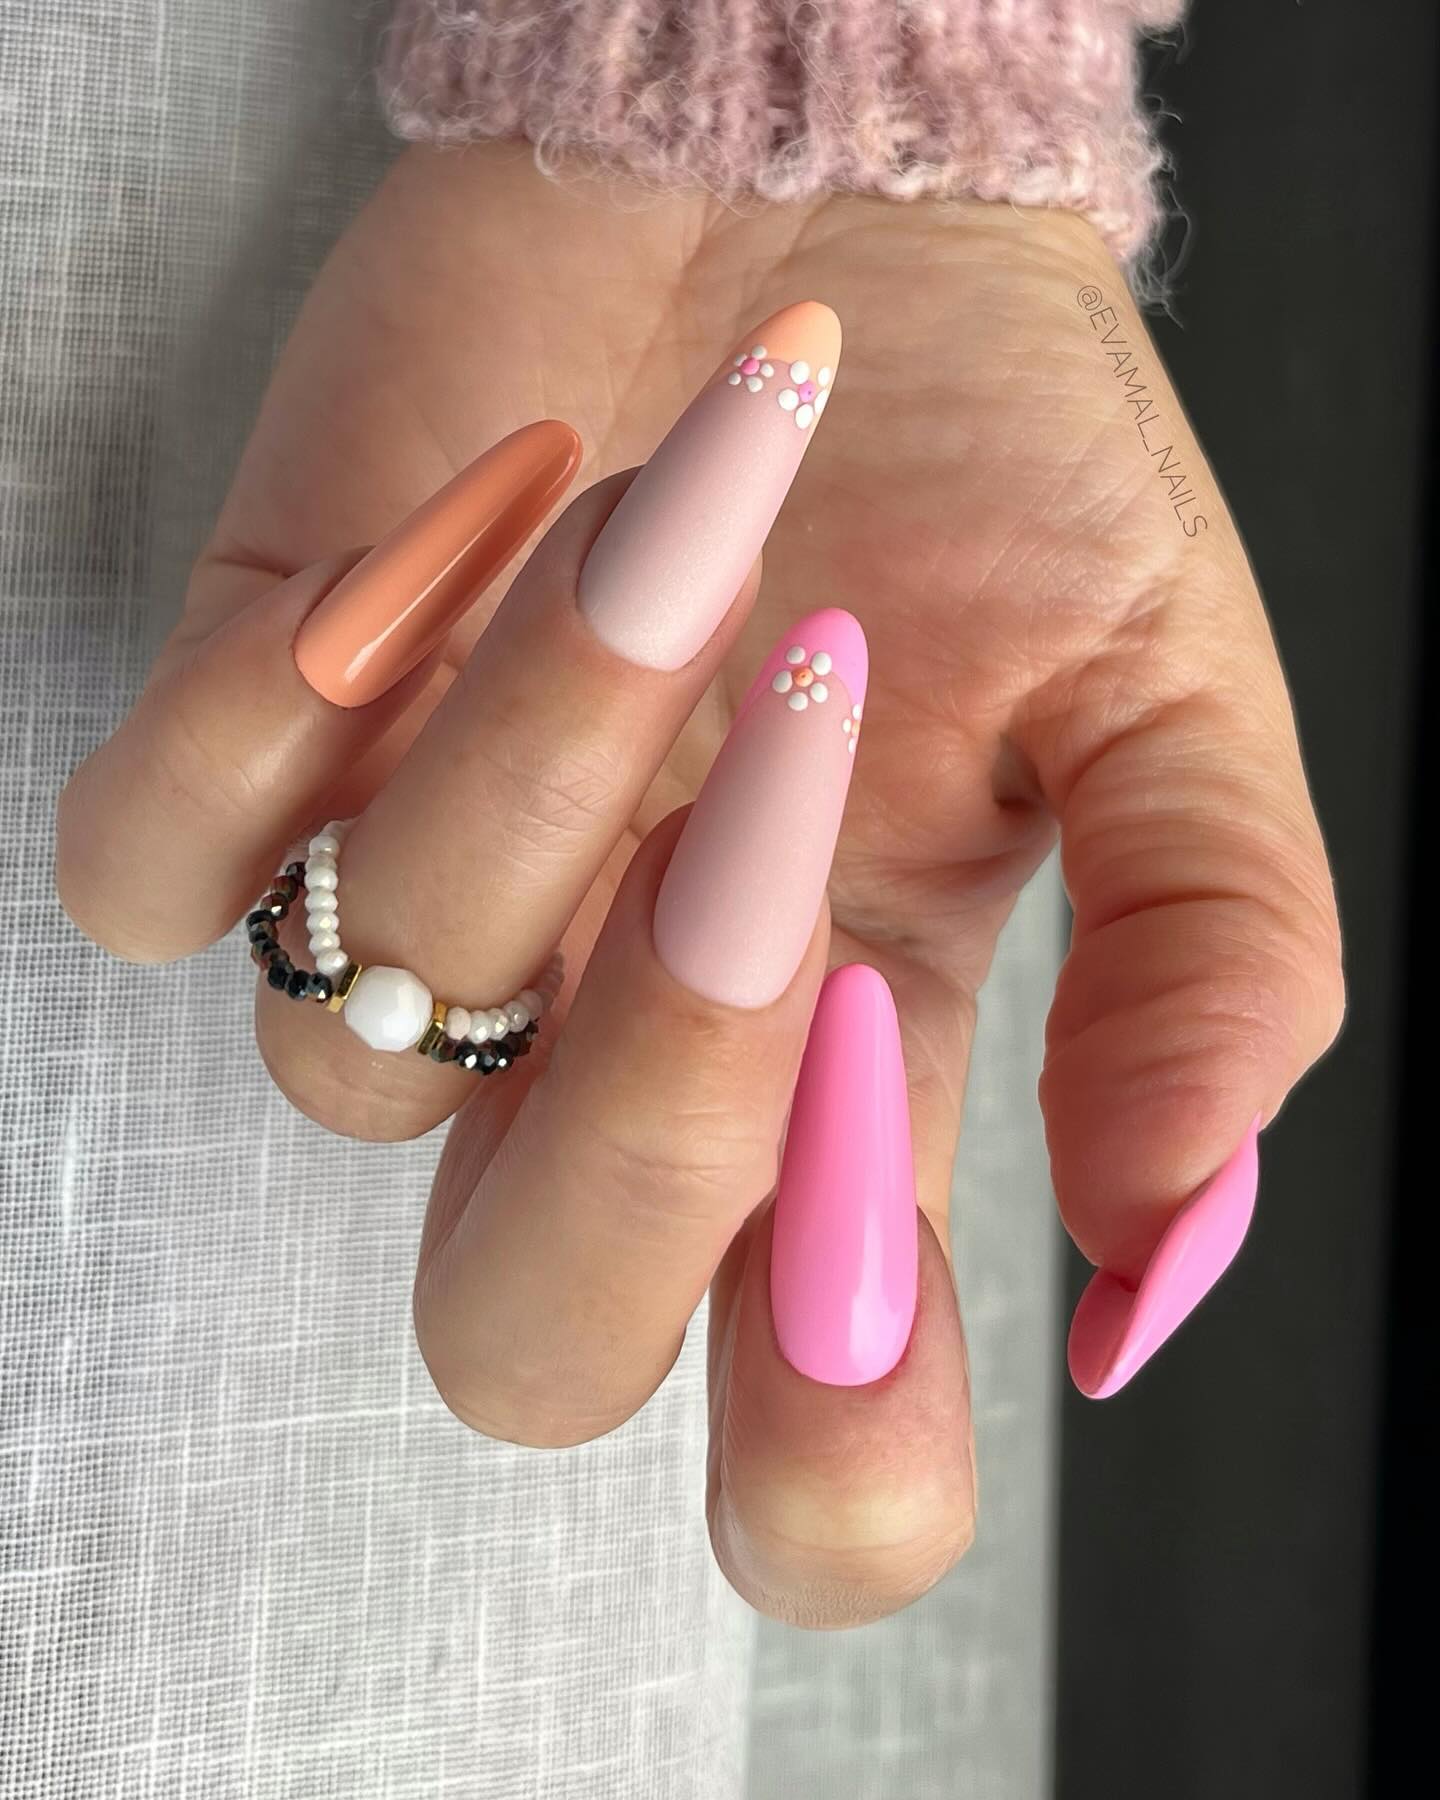 Spring french tip nails with a mix of pink and blue french tip nails, embodying spring nail designs and colorful nails for the season.